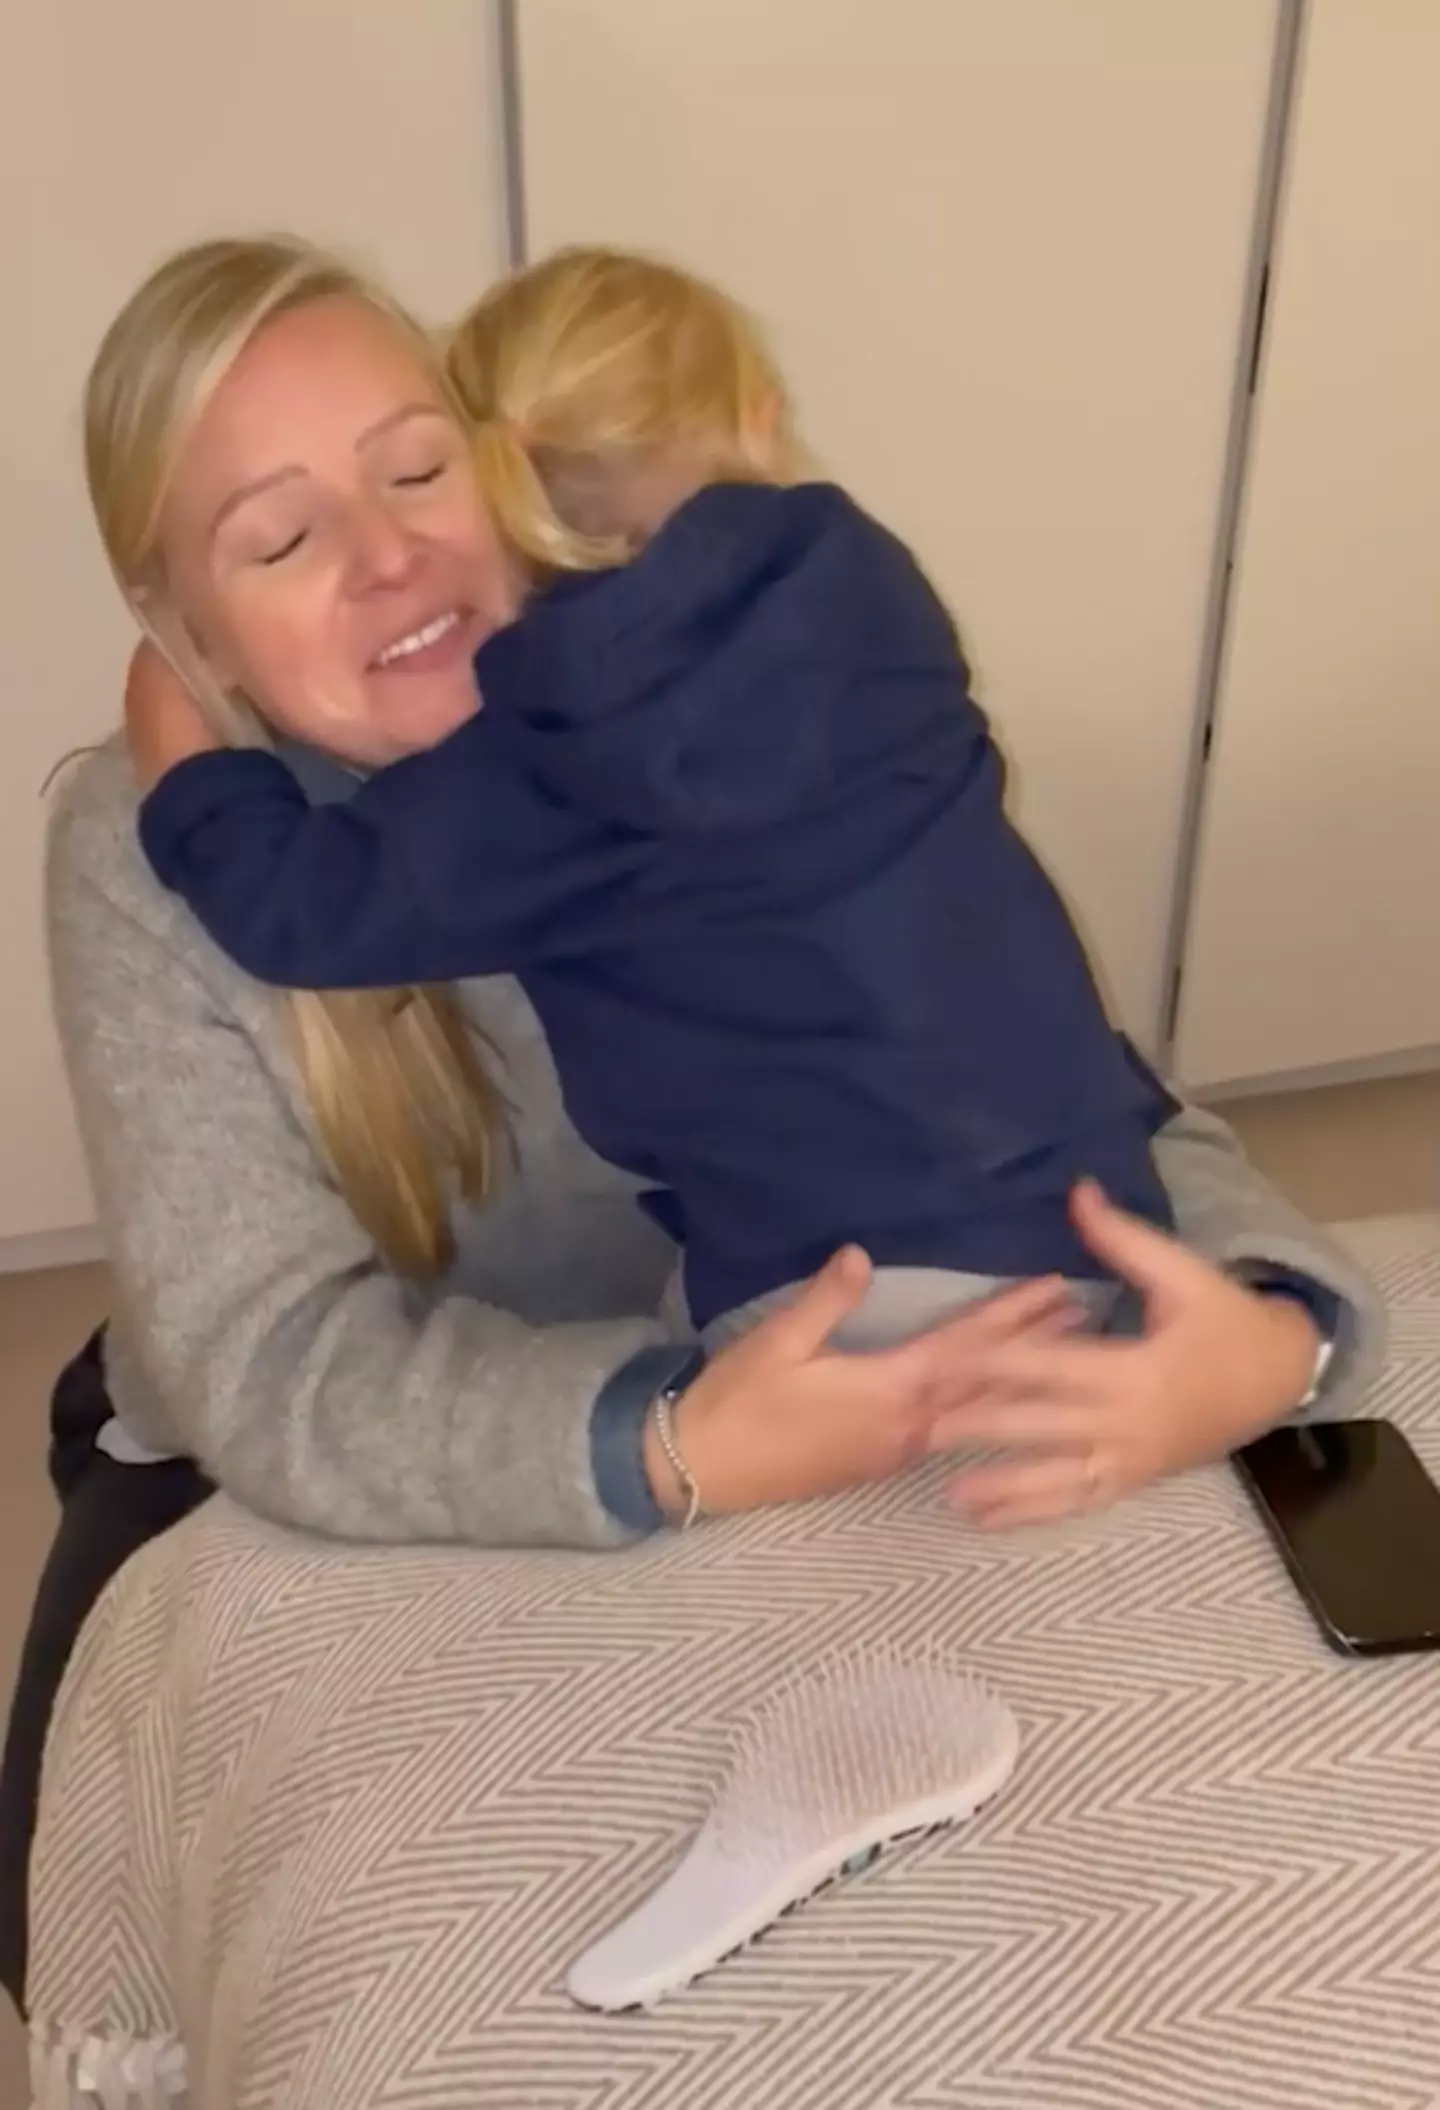 The mum could be seen giggling at the end of the video.